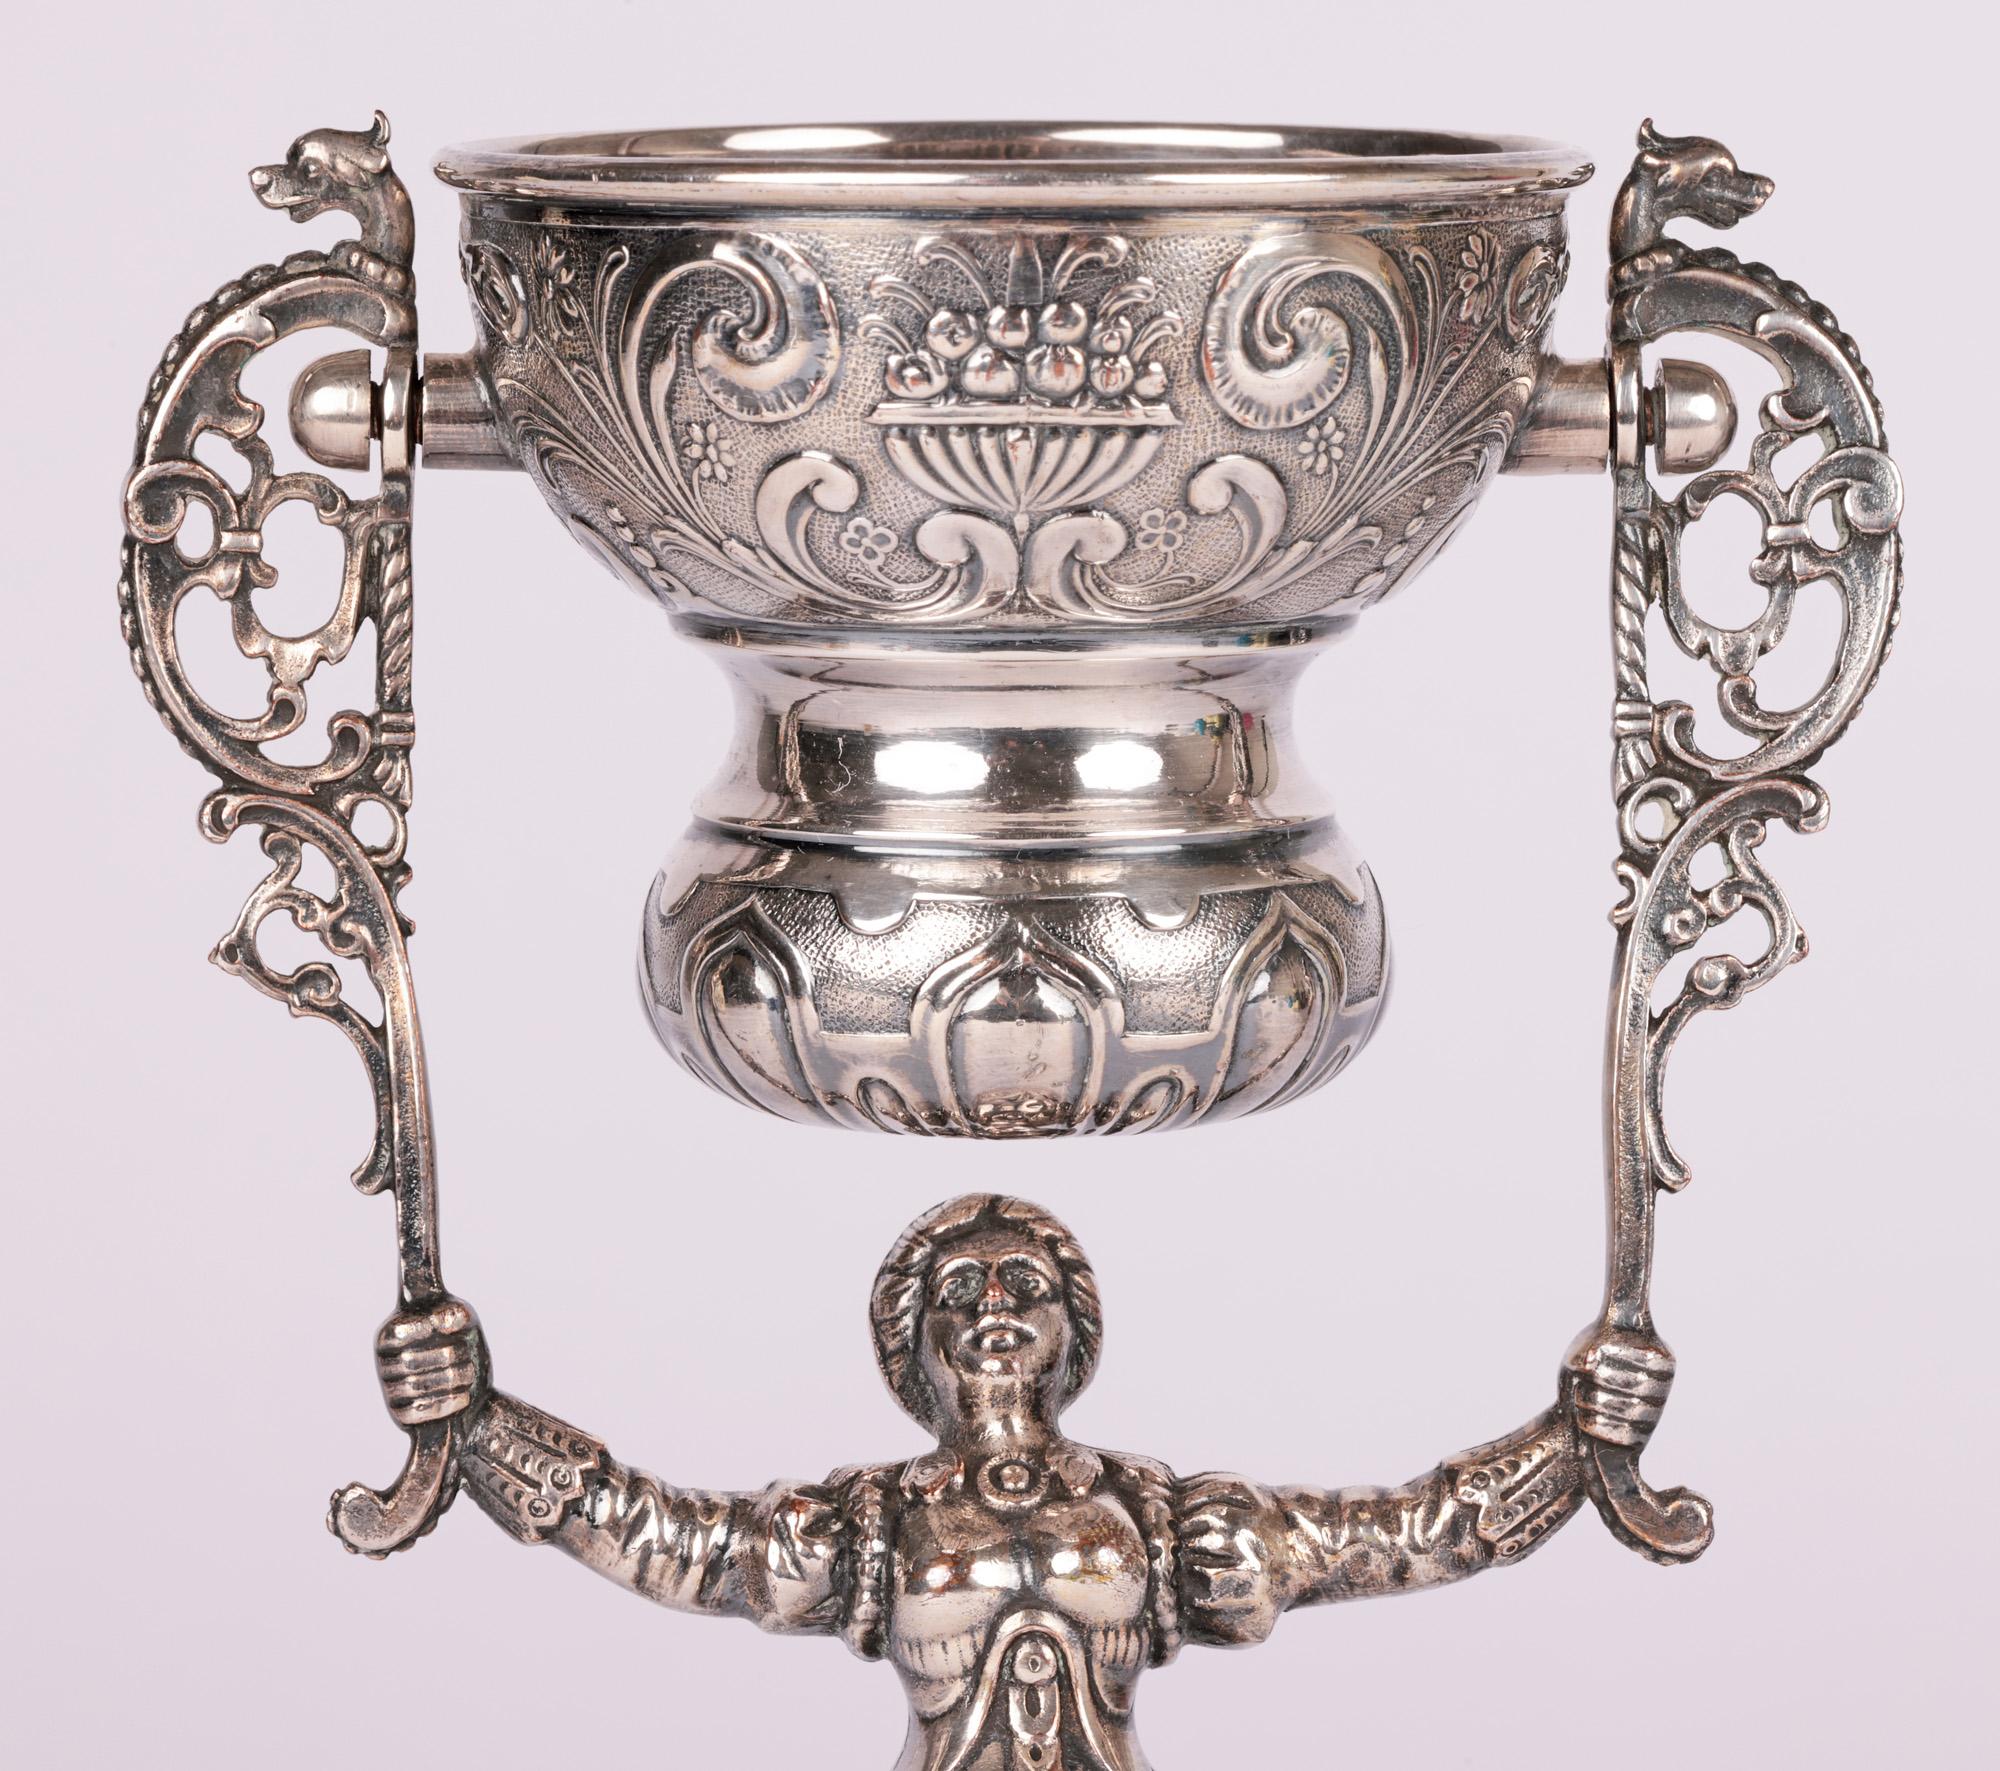 A superb quality Dutch antique silver-plated marriage wager cup dating from the 19th century. The cup is formed as a lady with a bell shaped body formed as a long skirt heavily embossed with scroll patterning with bird heads, flowers and leaves. The